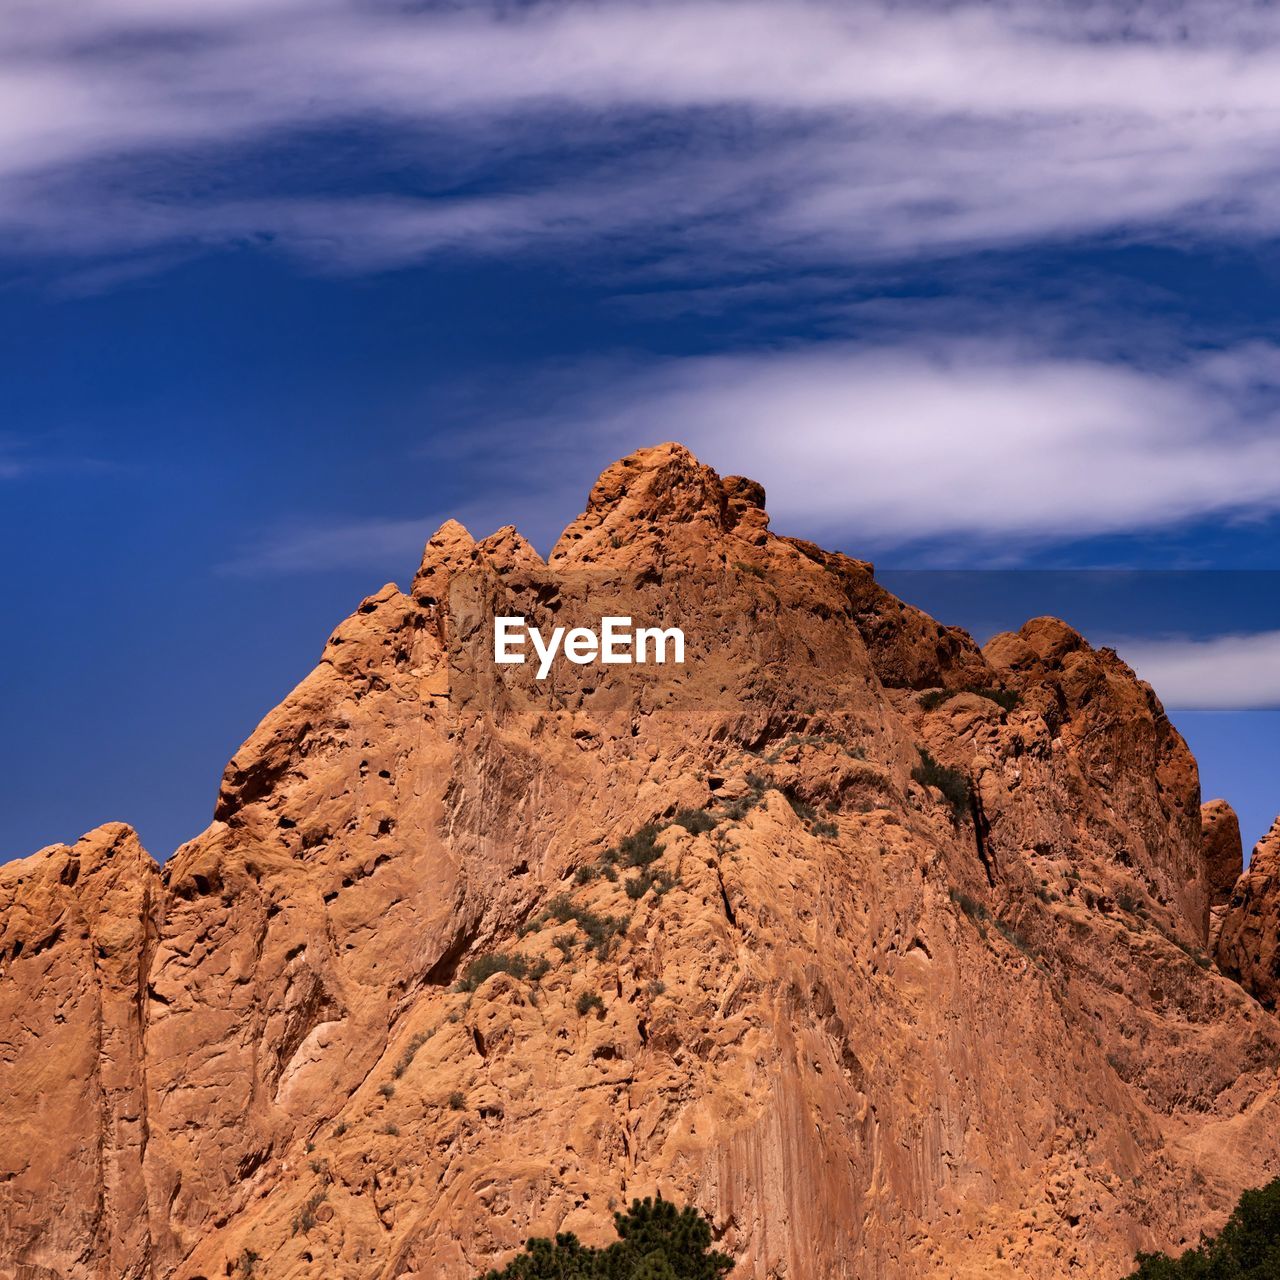 sky, rock, landscape, scenics - nature, environment, nature, beauty in nature, mountain, cloud, land, rock formation, travel destinations, travel, desert, non-urban scene, no people, semi-arid, wilderness, outdoors, plant, tranquility, geology, mountain range, plateau, natural environment, valley, climate, blue, tourism, tranquil scene, extreme terrain, dramatic sky, sunset, remote, tree, sunlight, idyllic, arid climate, animal wildlife